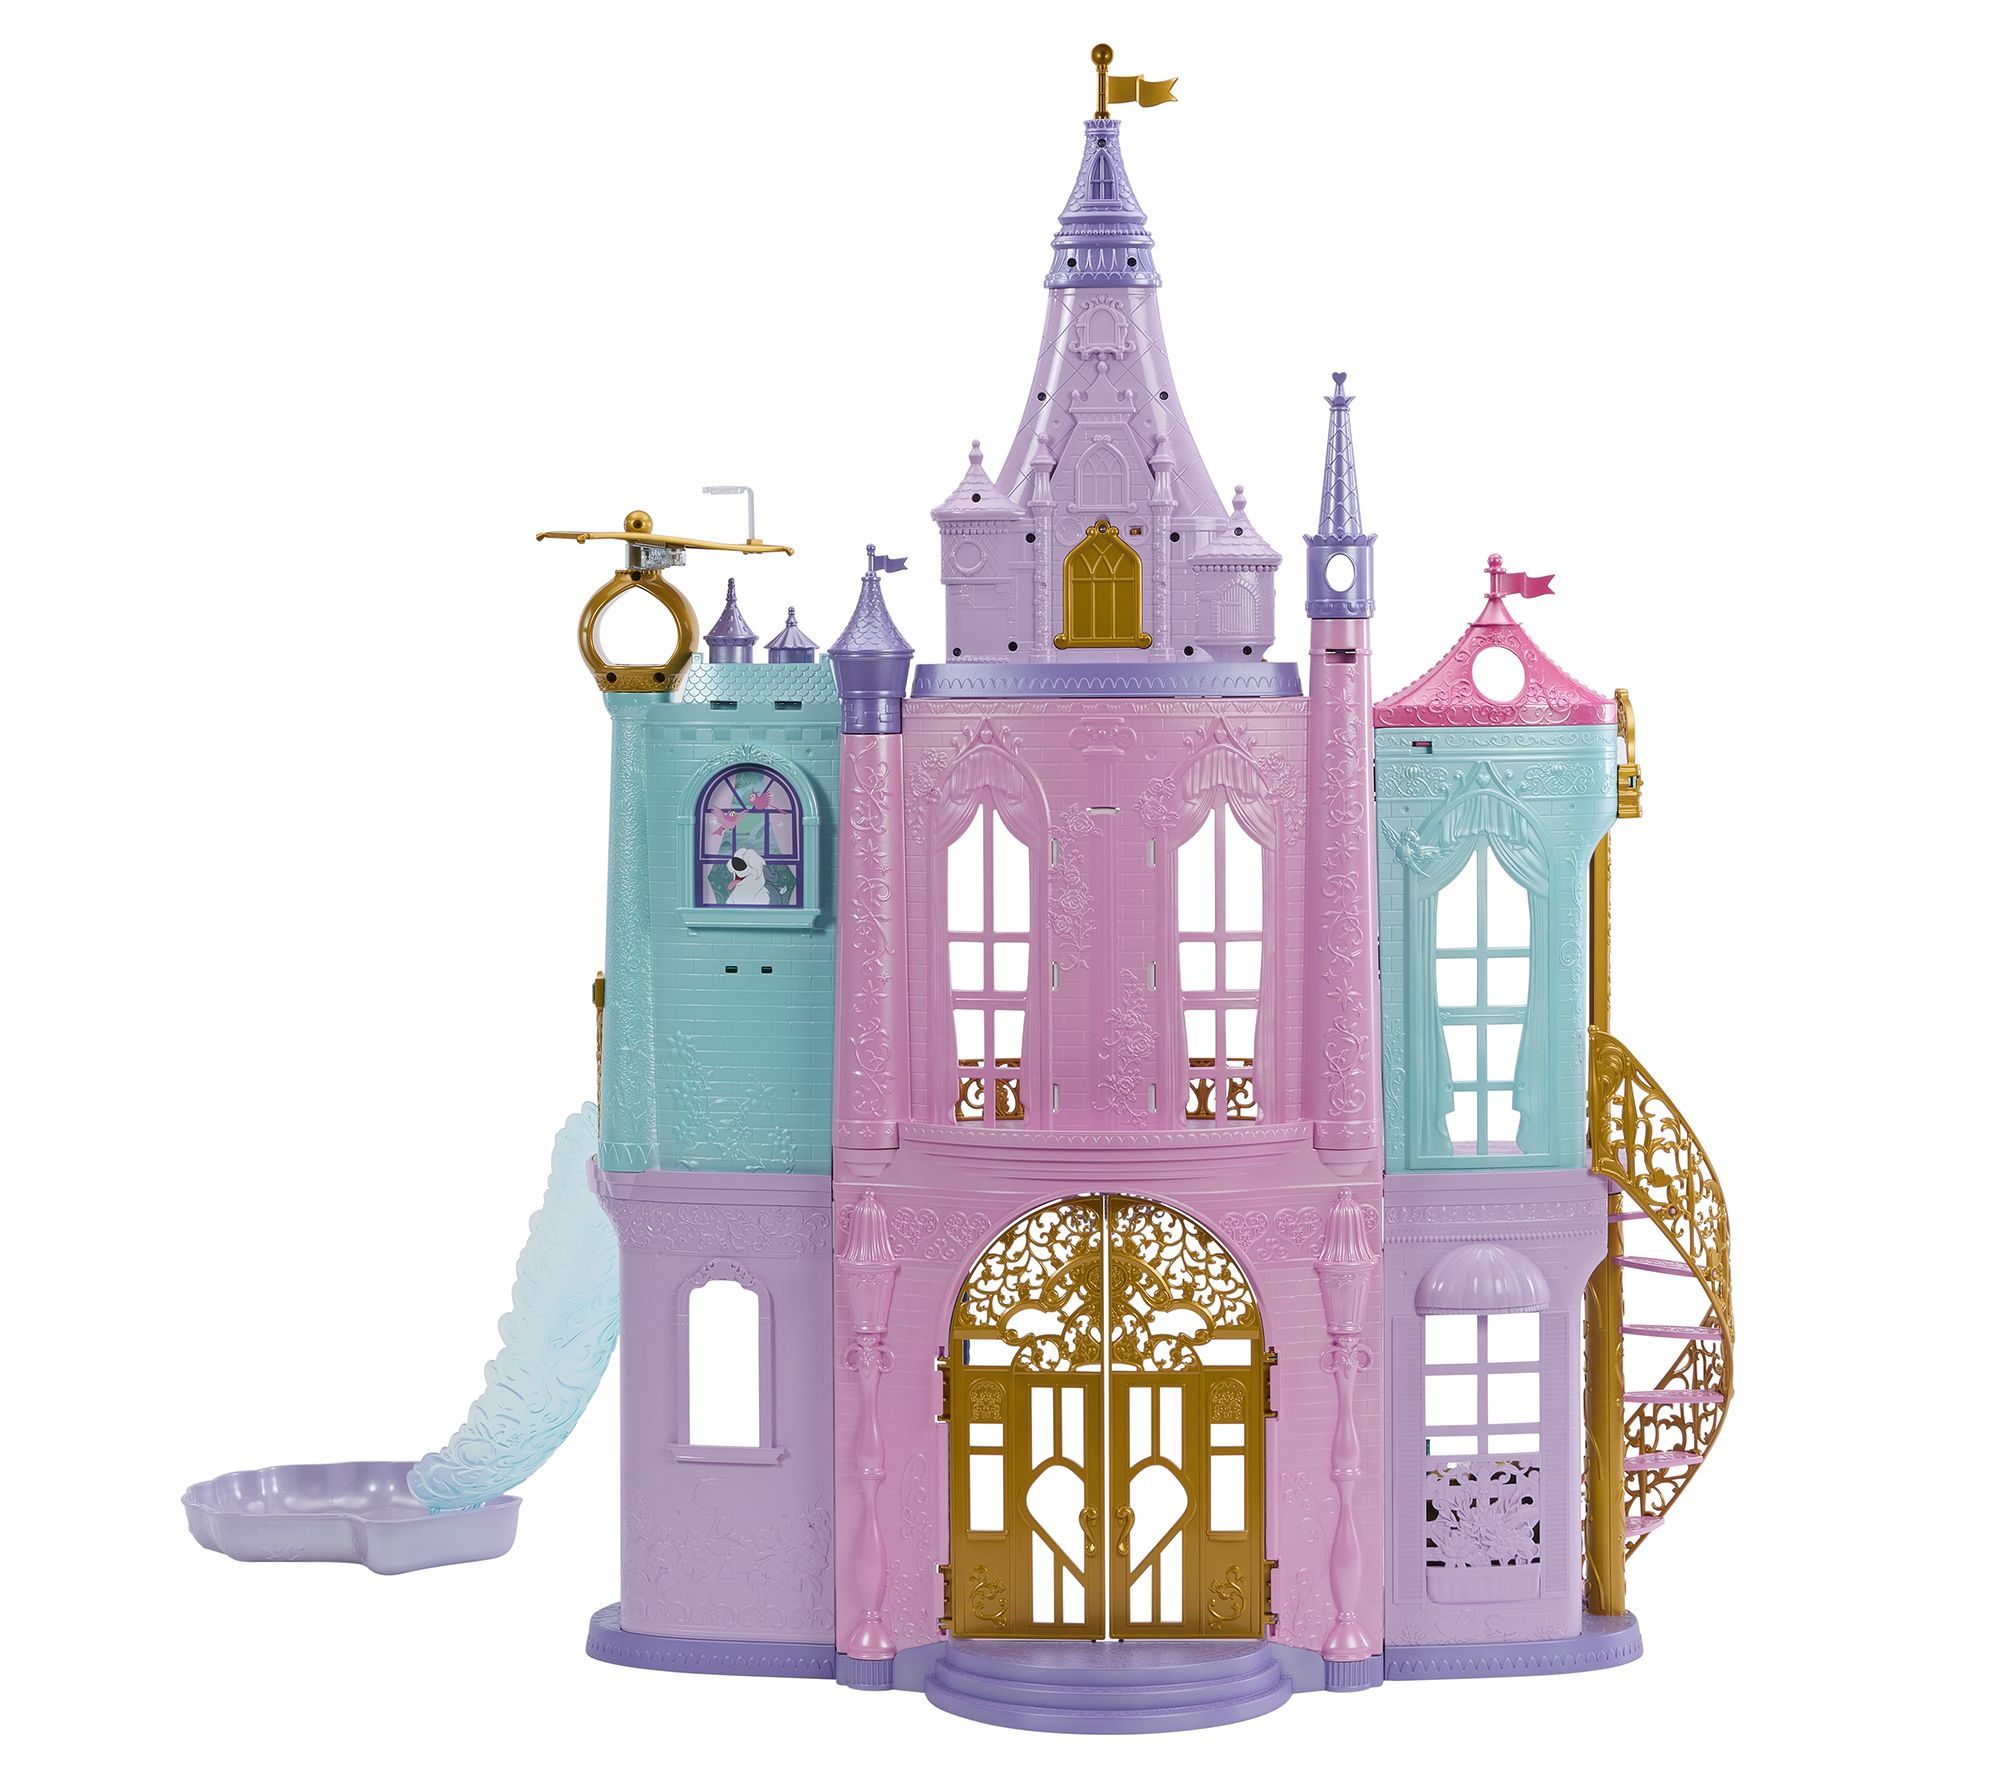 Make It Real Disney Princess 5 in 1 Activity Tower - Disney Princess  Jewelry Making Kit with Storage - Disney Princess Craft & Activity Set for  Kids - Jewelry Making Kit for